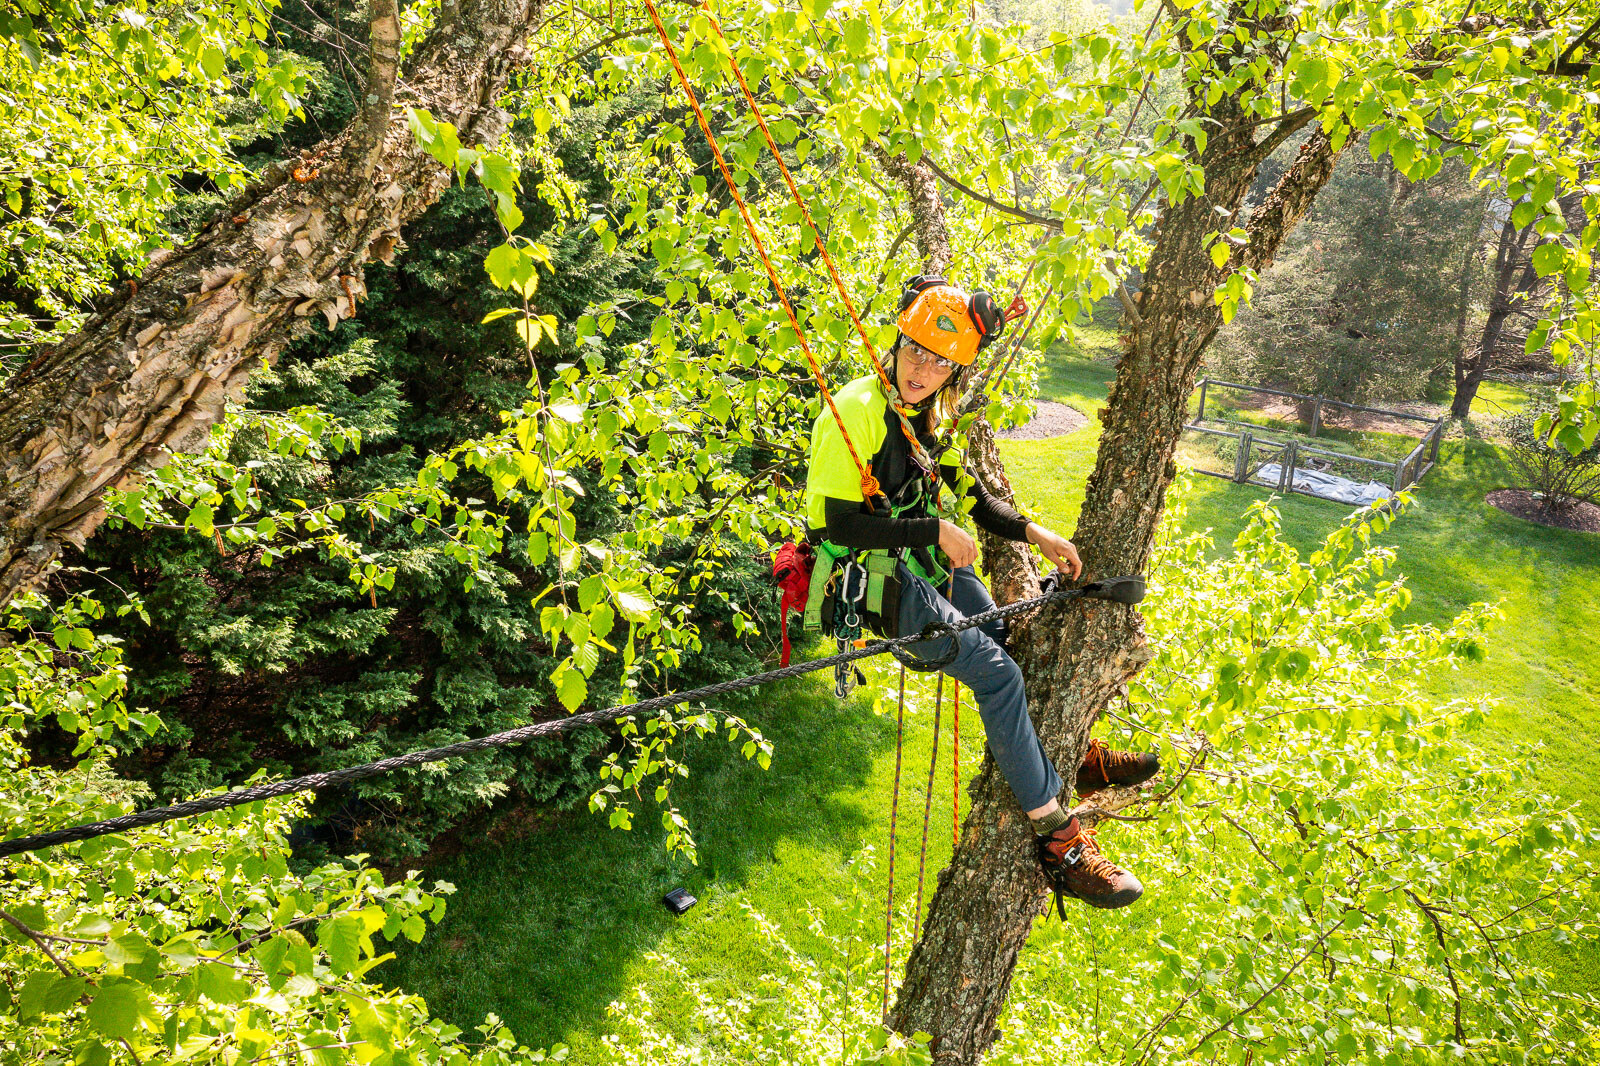 arborist in tree climbing and assisting with cabling and bracing 42